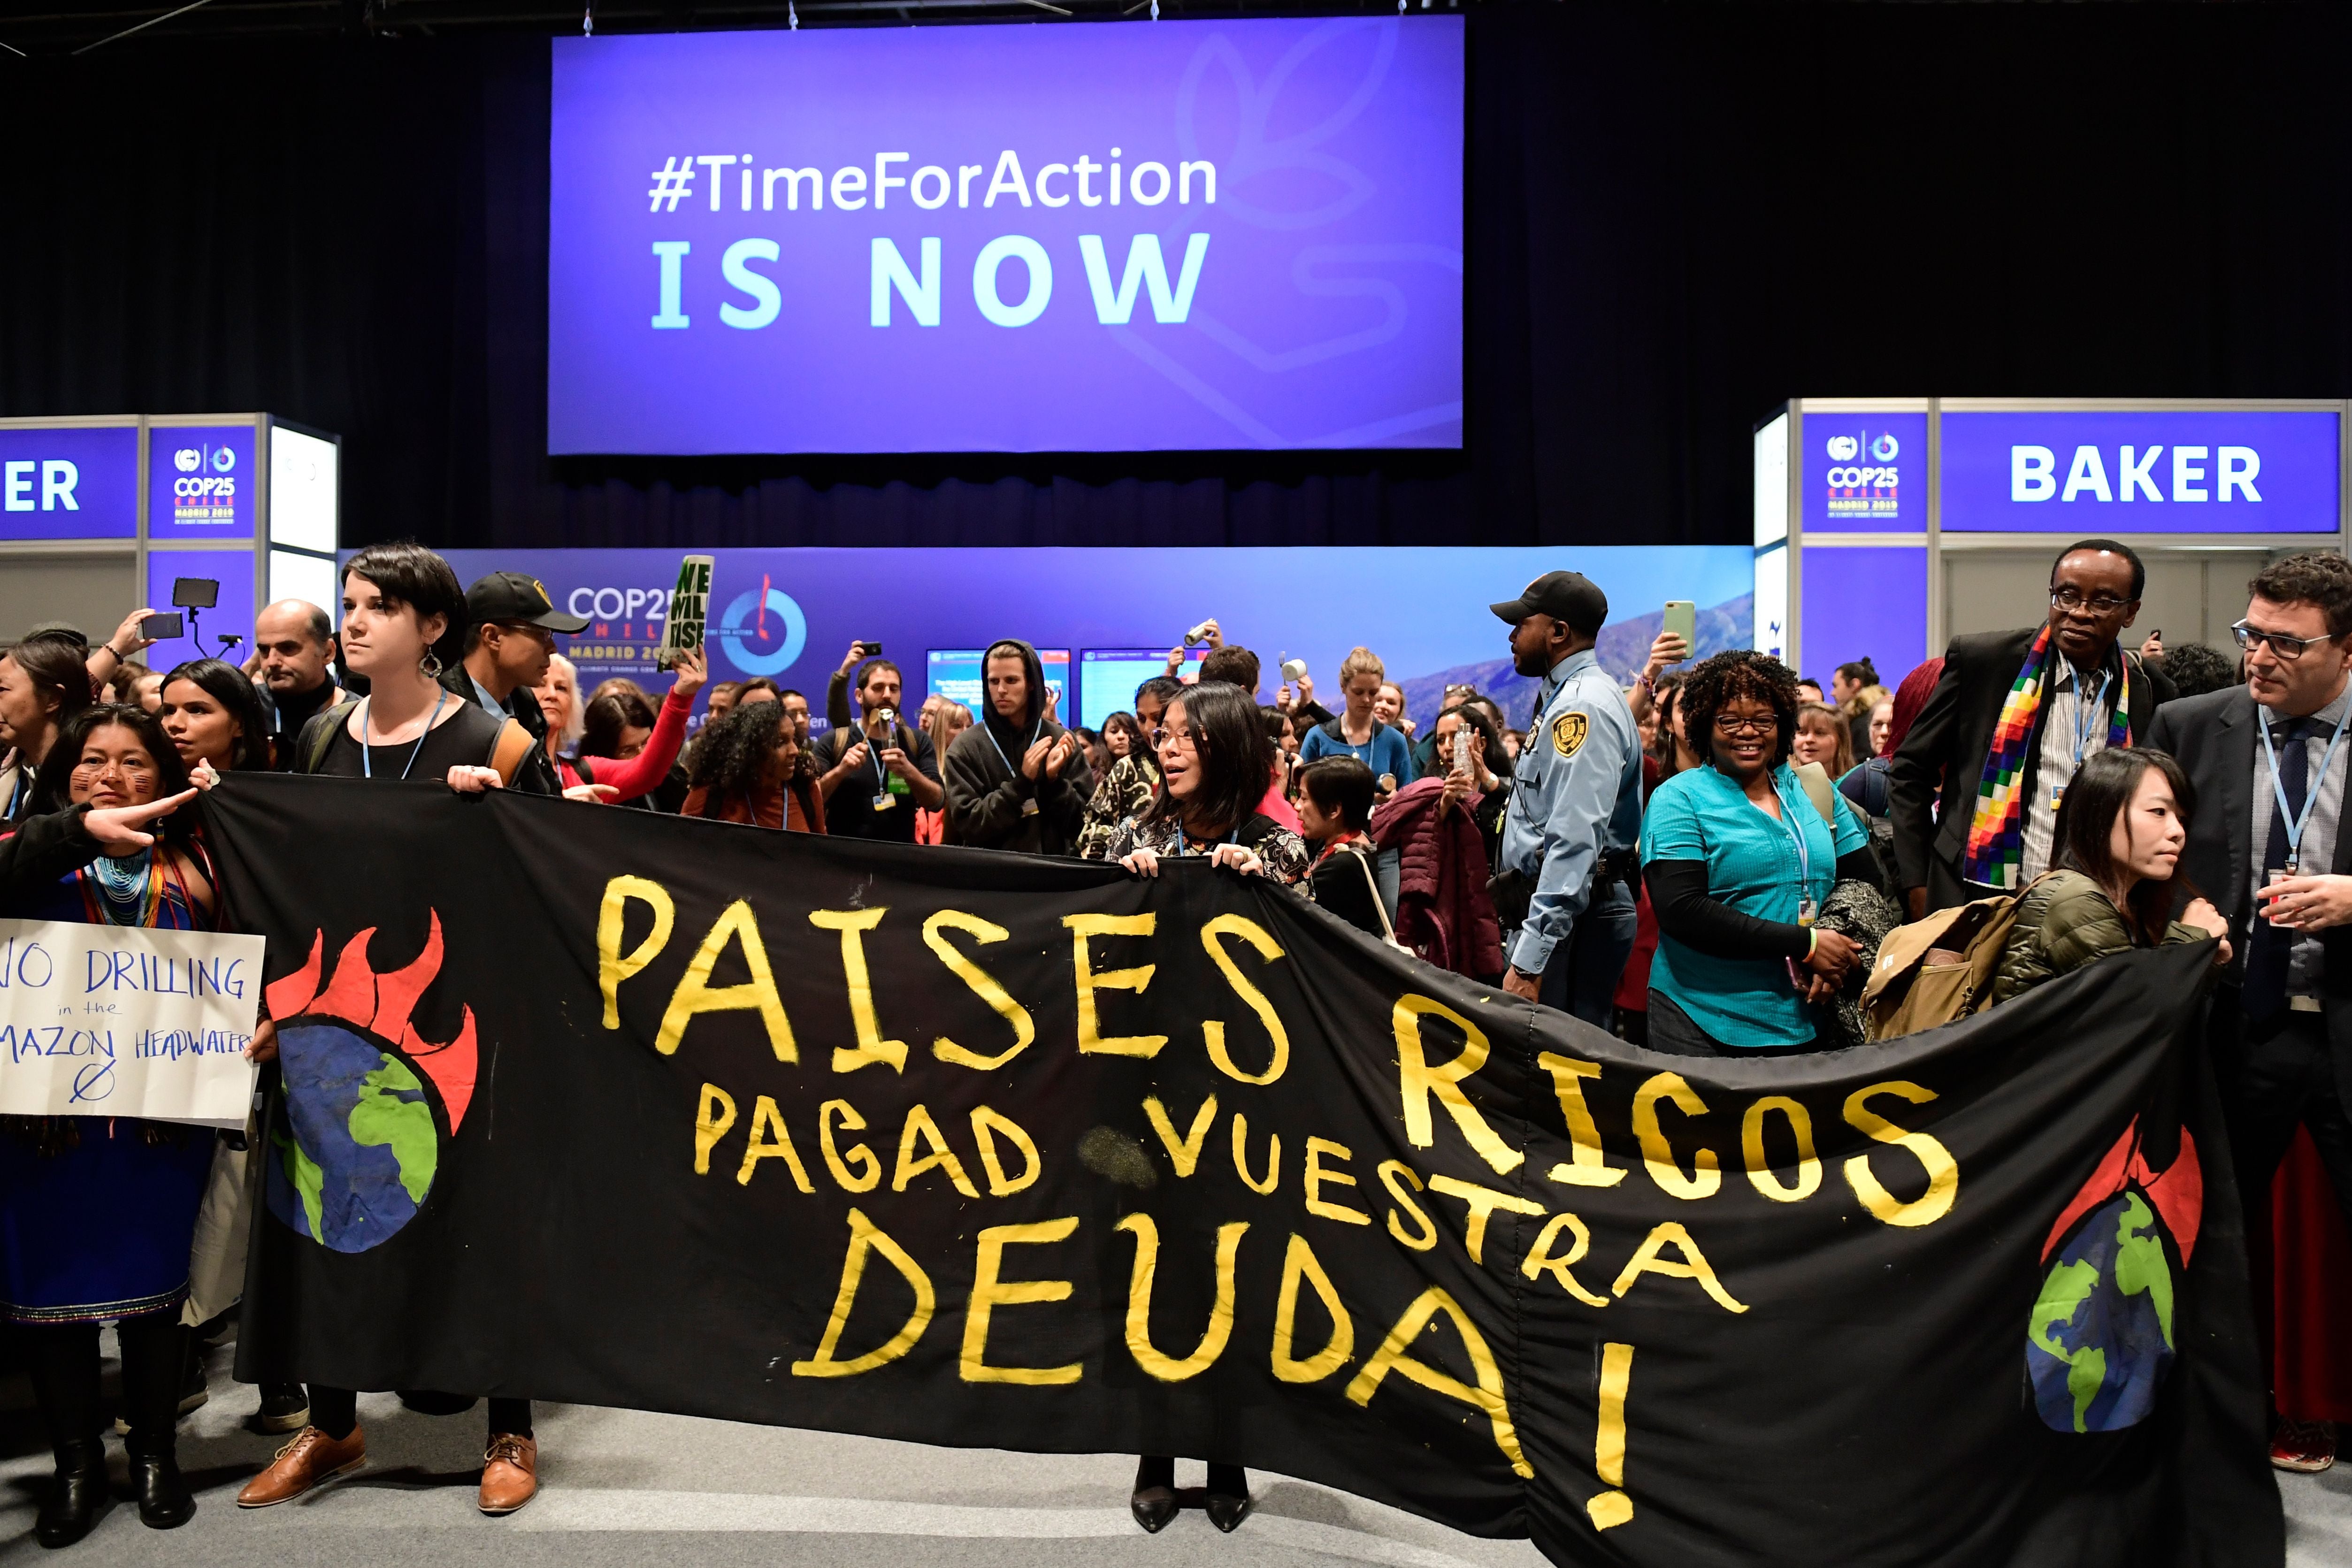 Campaigners at Cop25 in Madrid urge rich countries to pay debts and stop deforestation in the Amazon